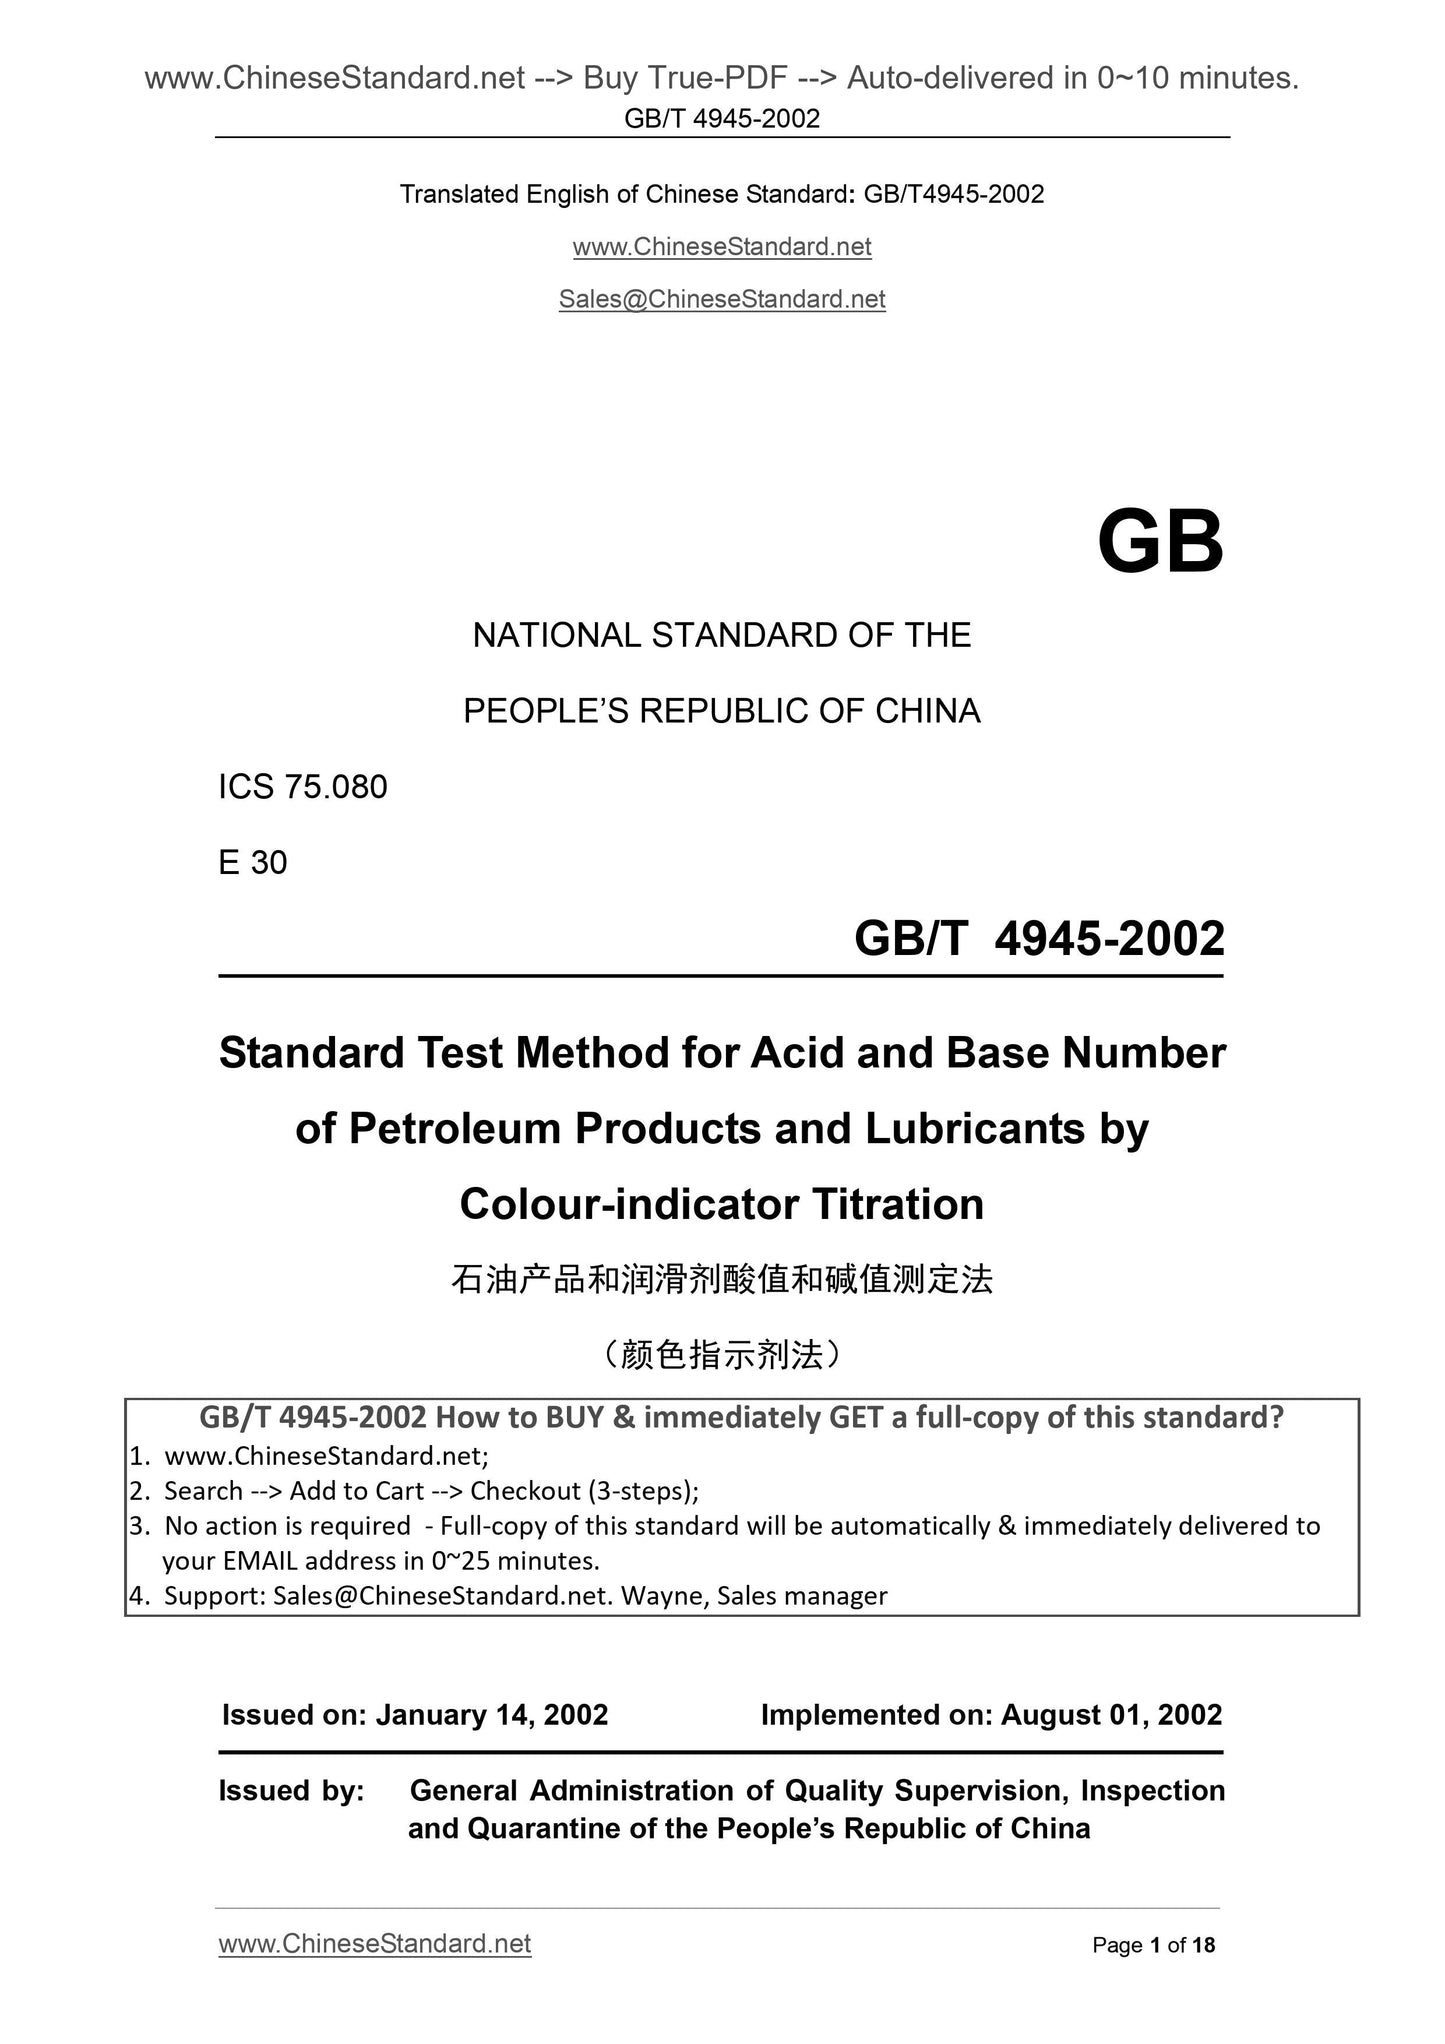 GB/T 4945-2002 Page 1